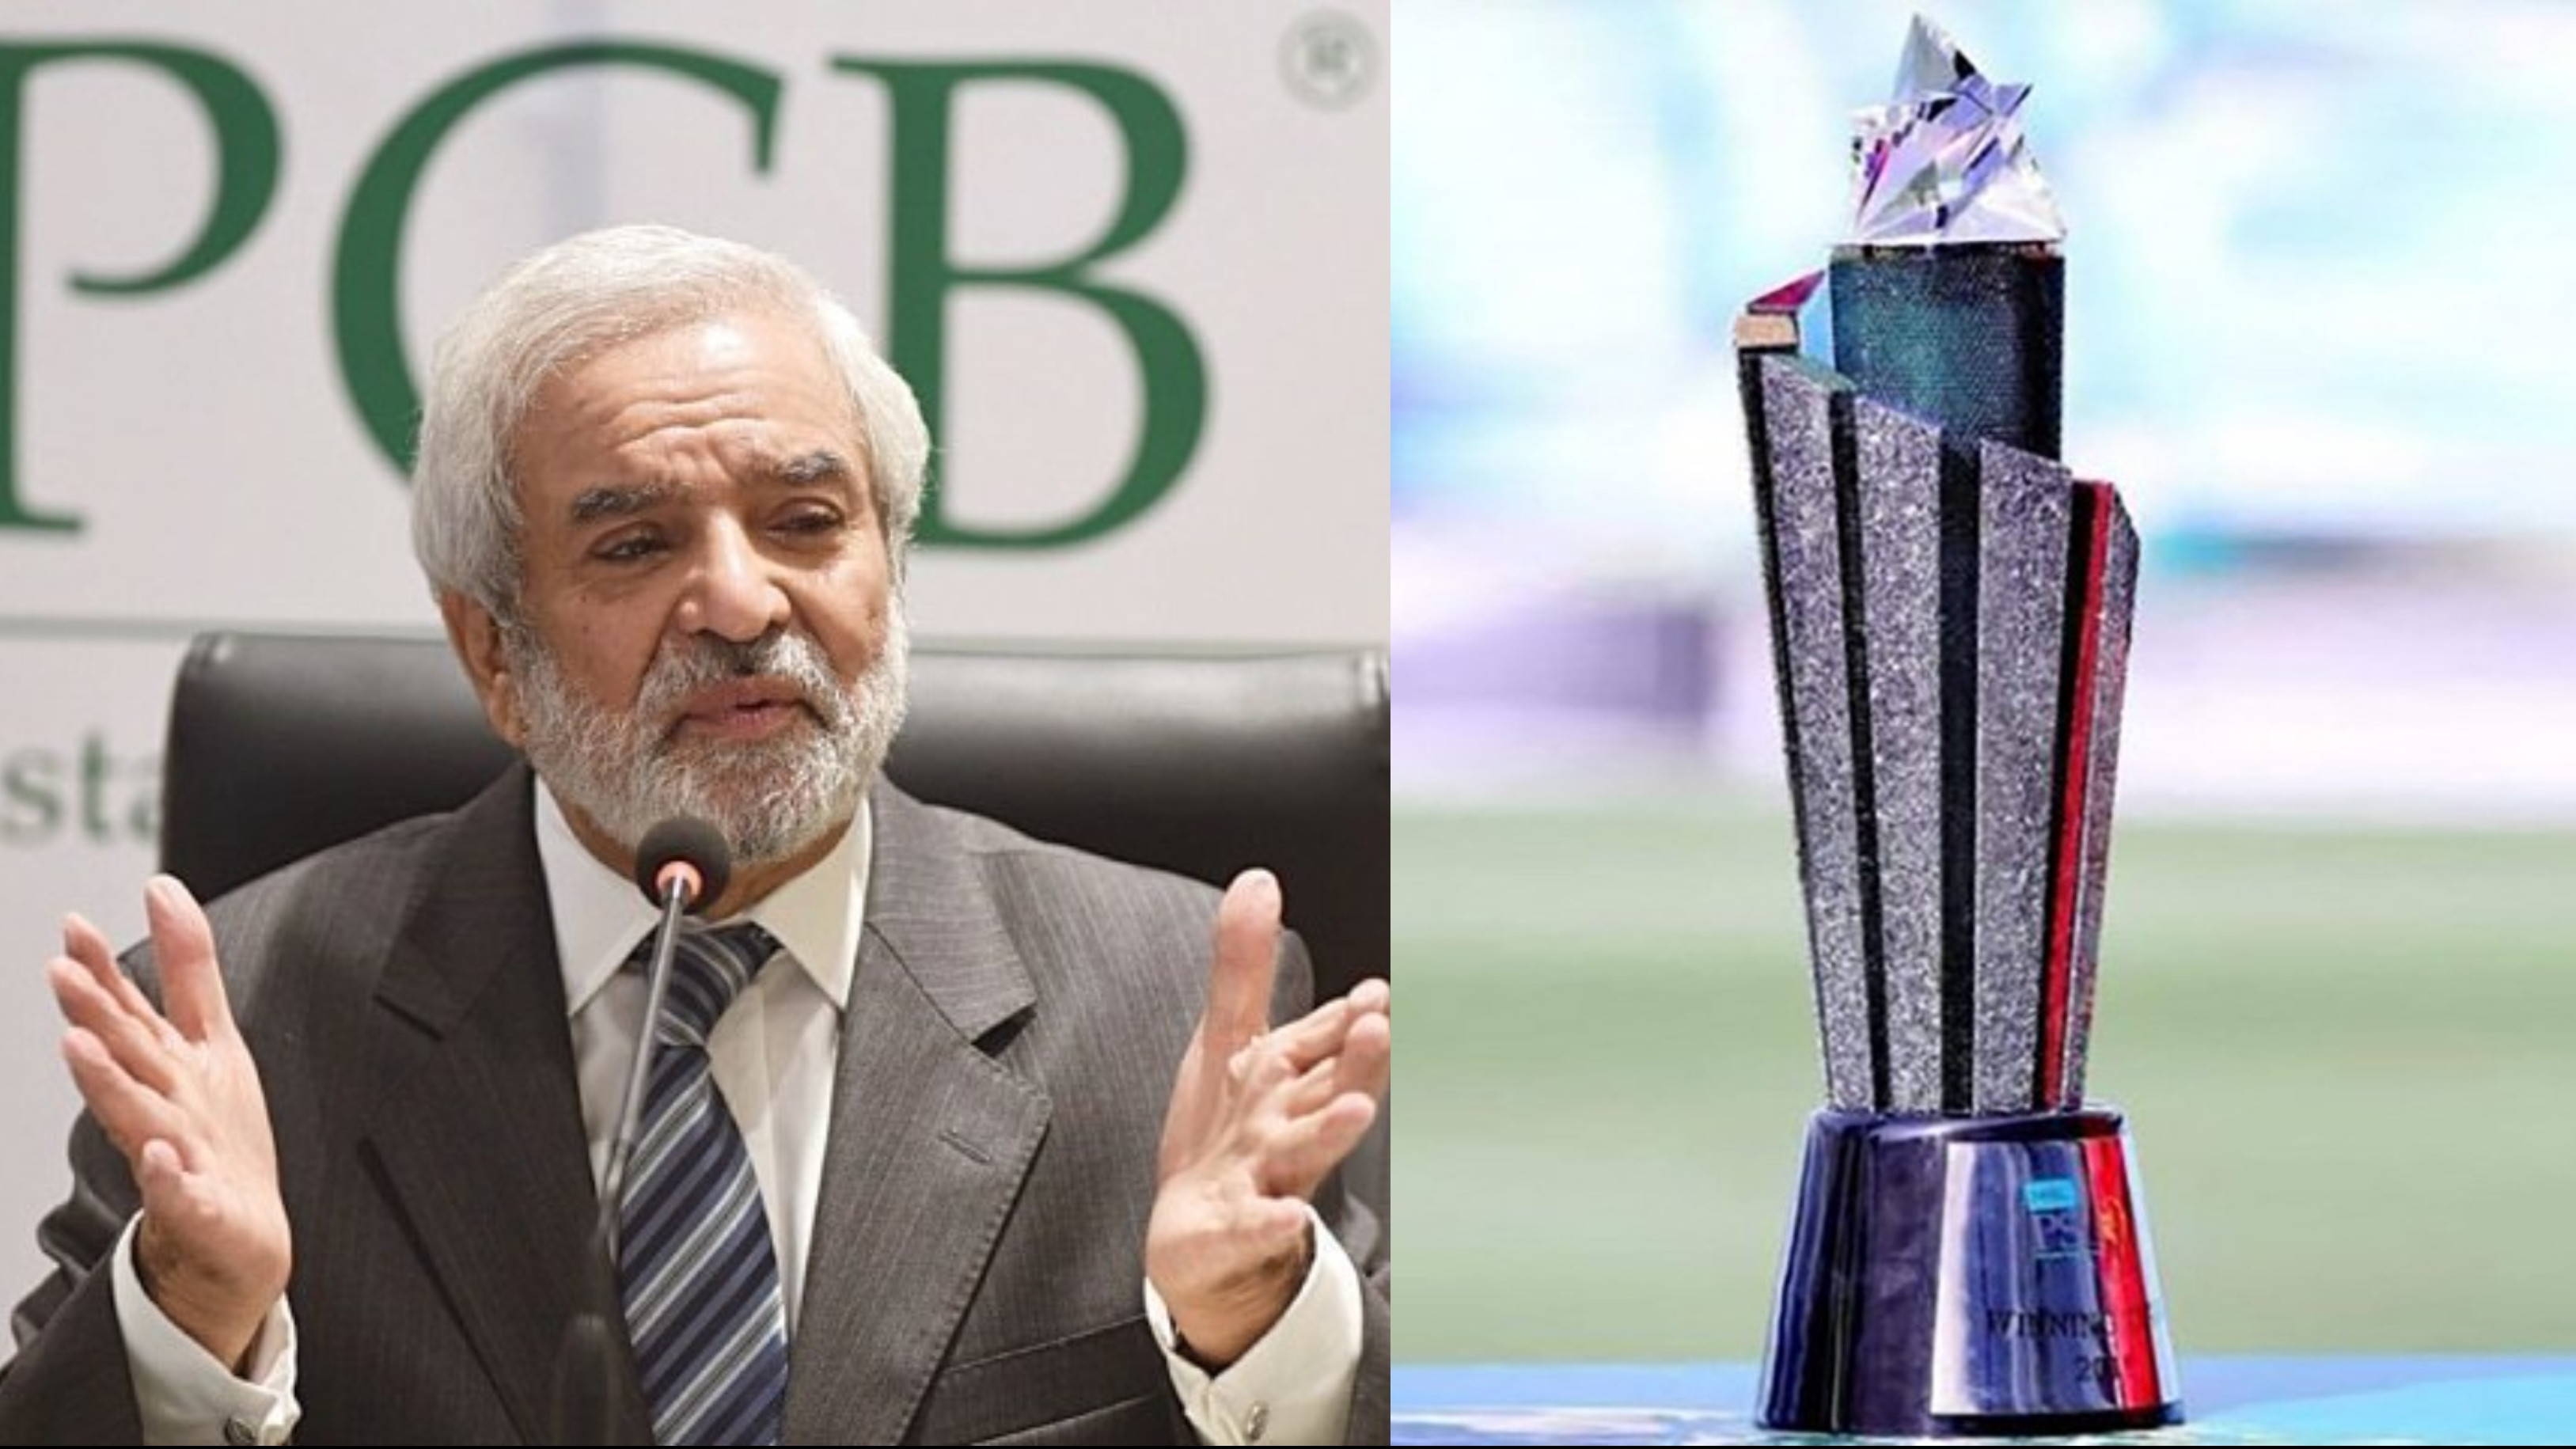 PSL 2022 will be staged in front of our people in Pakistan, says PCB chairman Ehsan Mani 